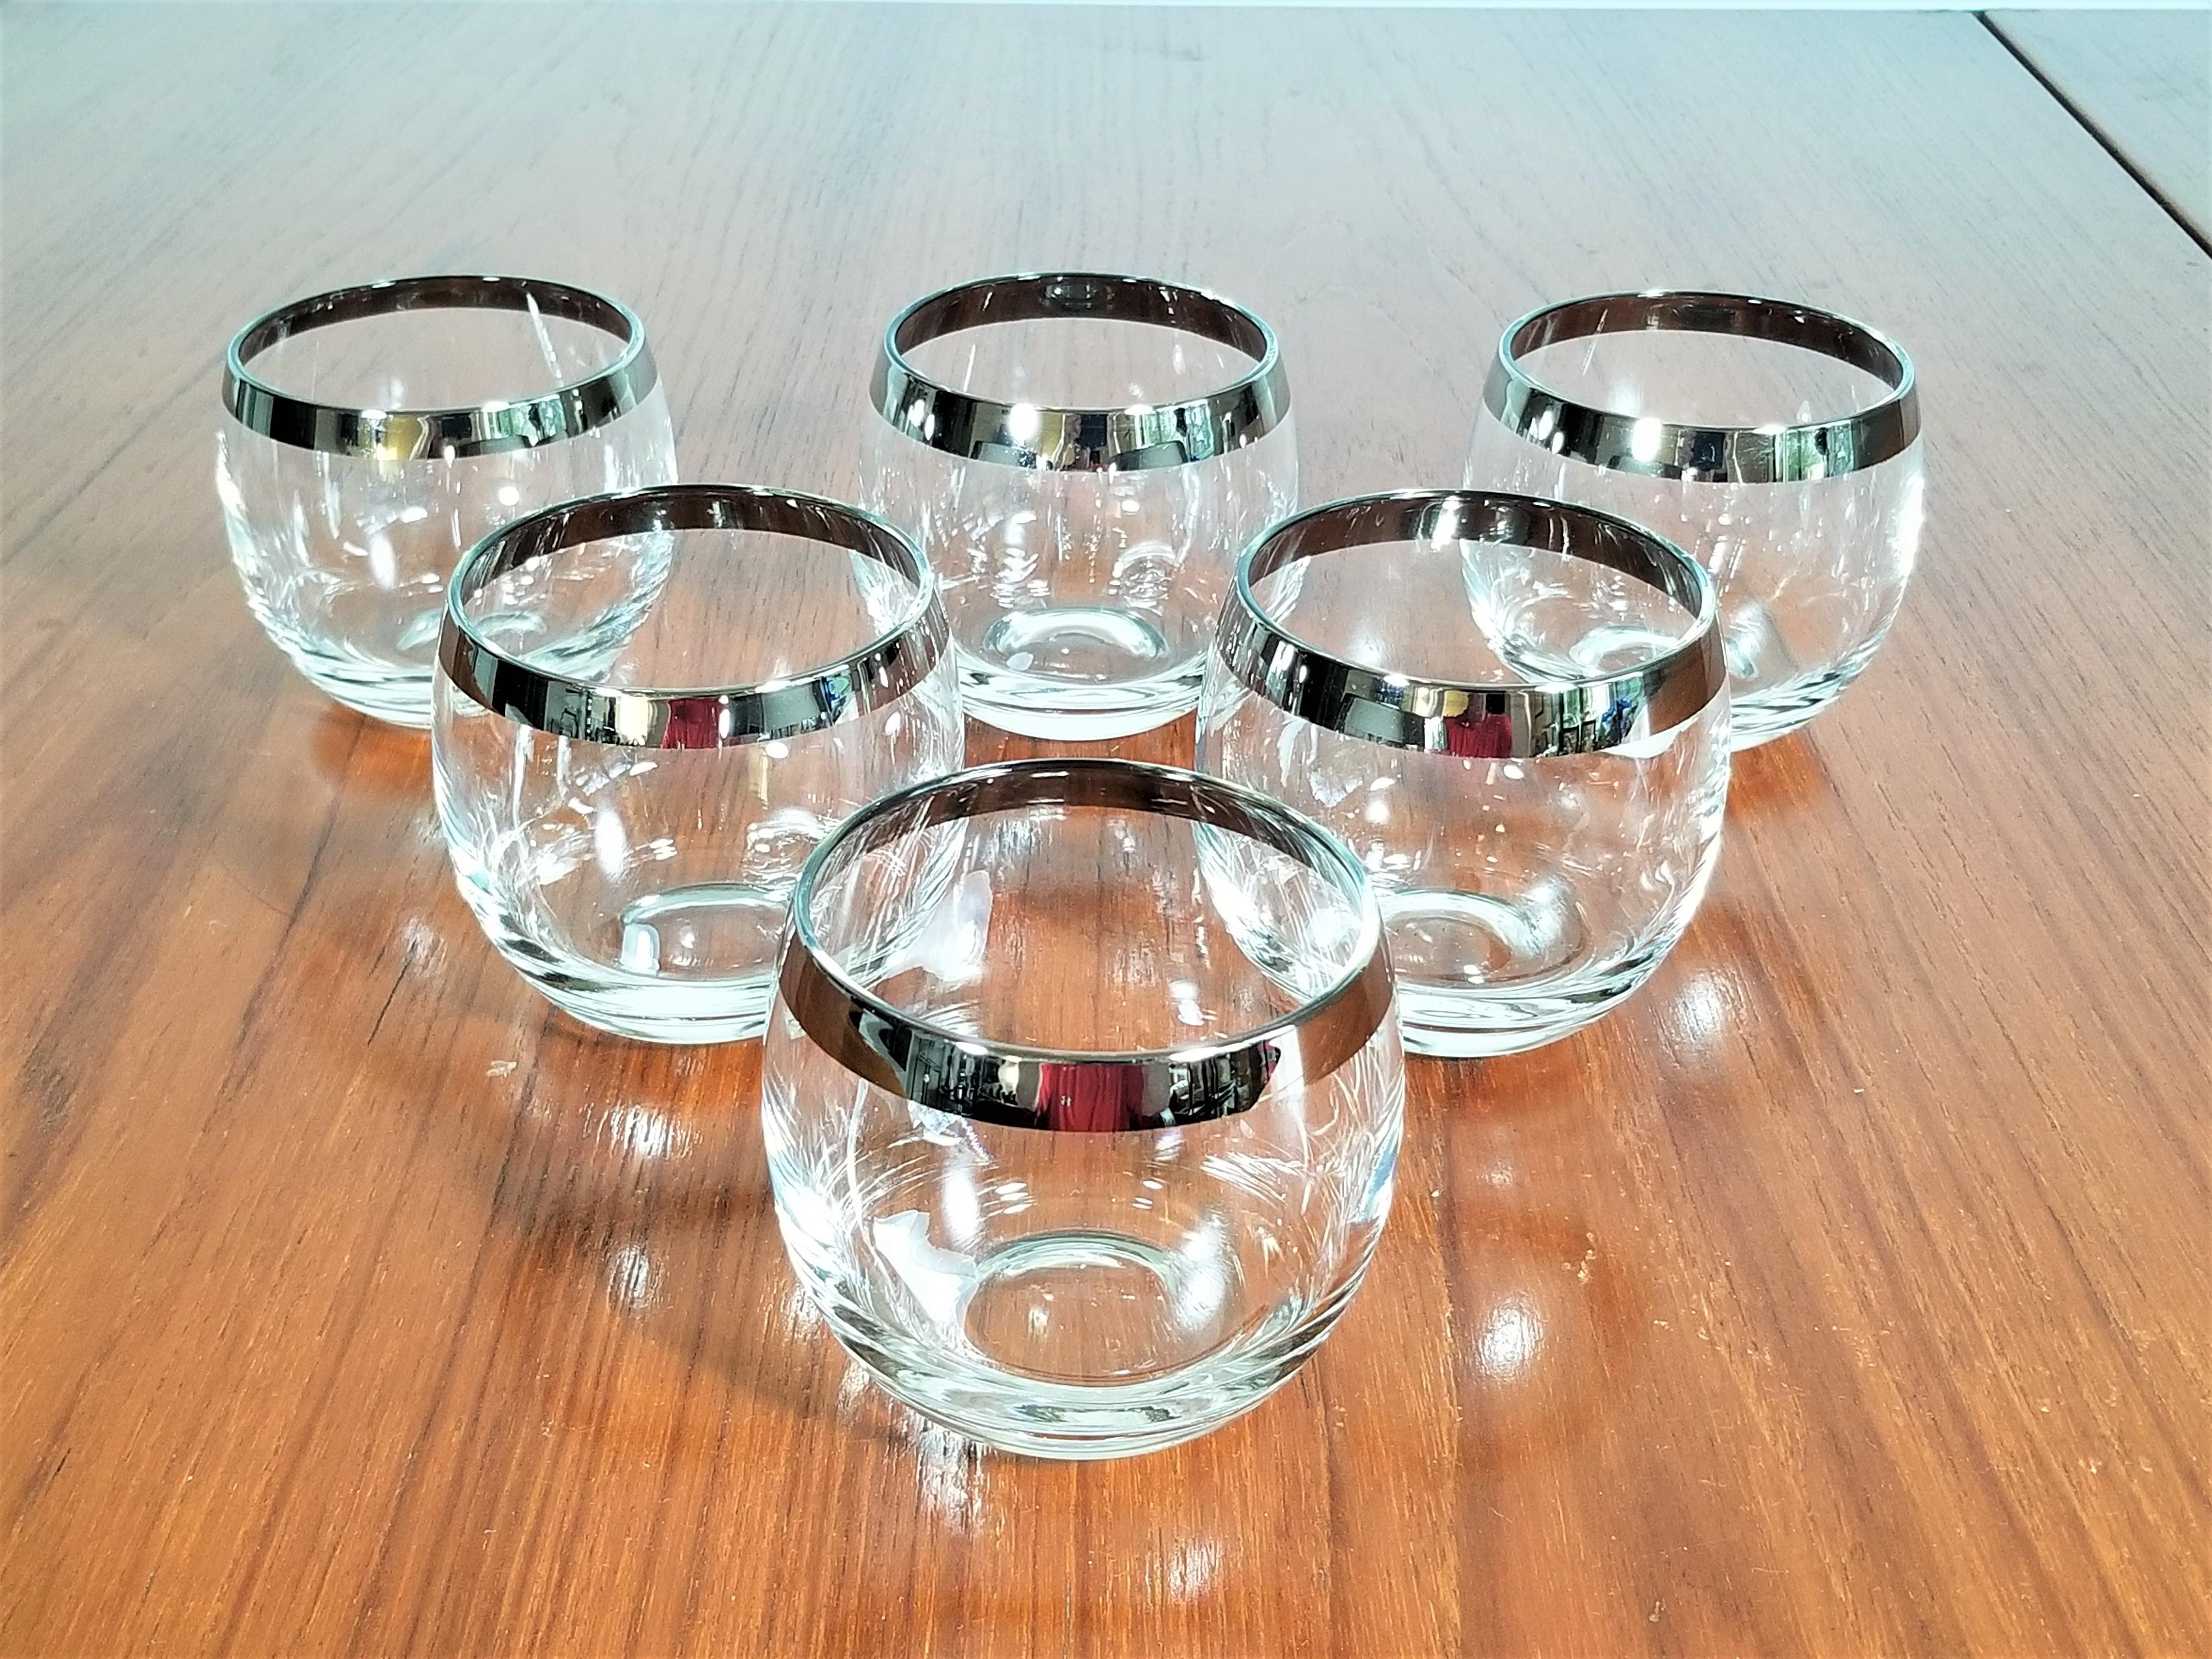 Set of 6 silver rimmed Dorothy Thorpe glasses. Rolly Polly style.